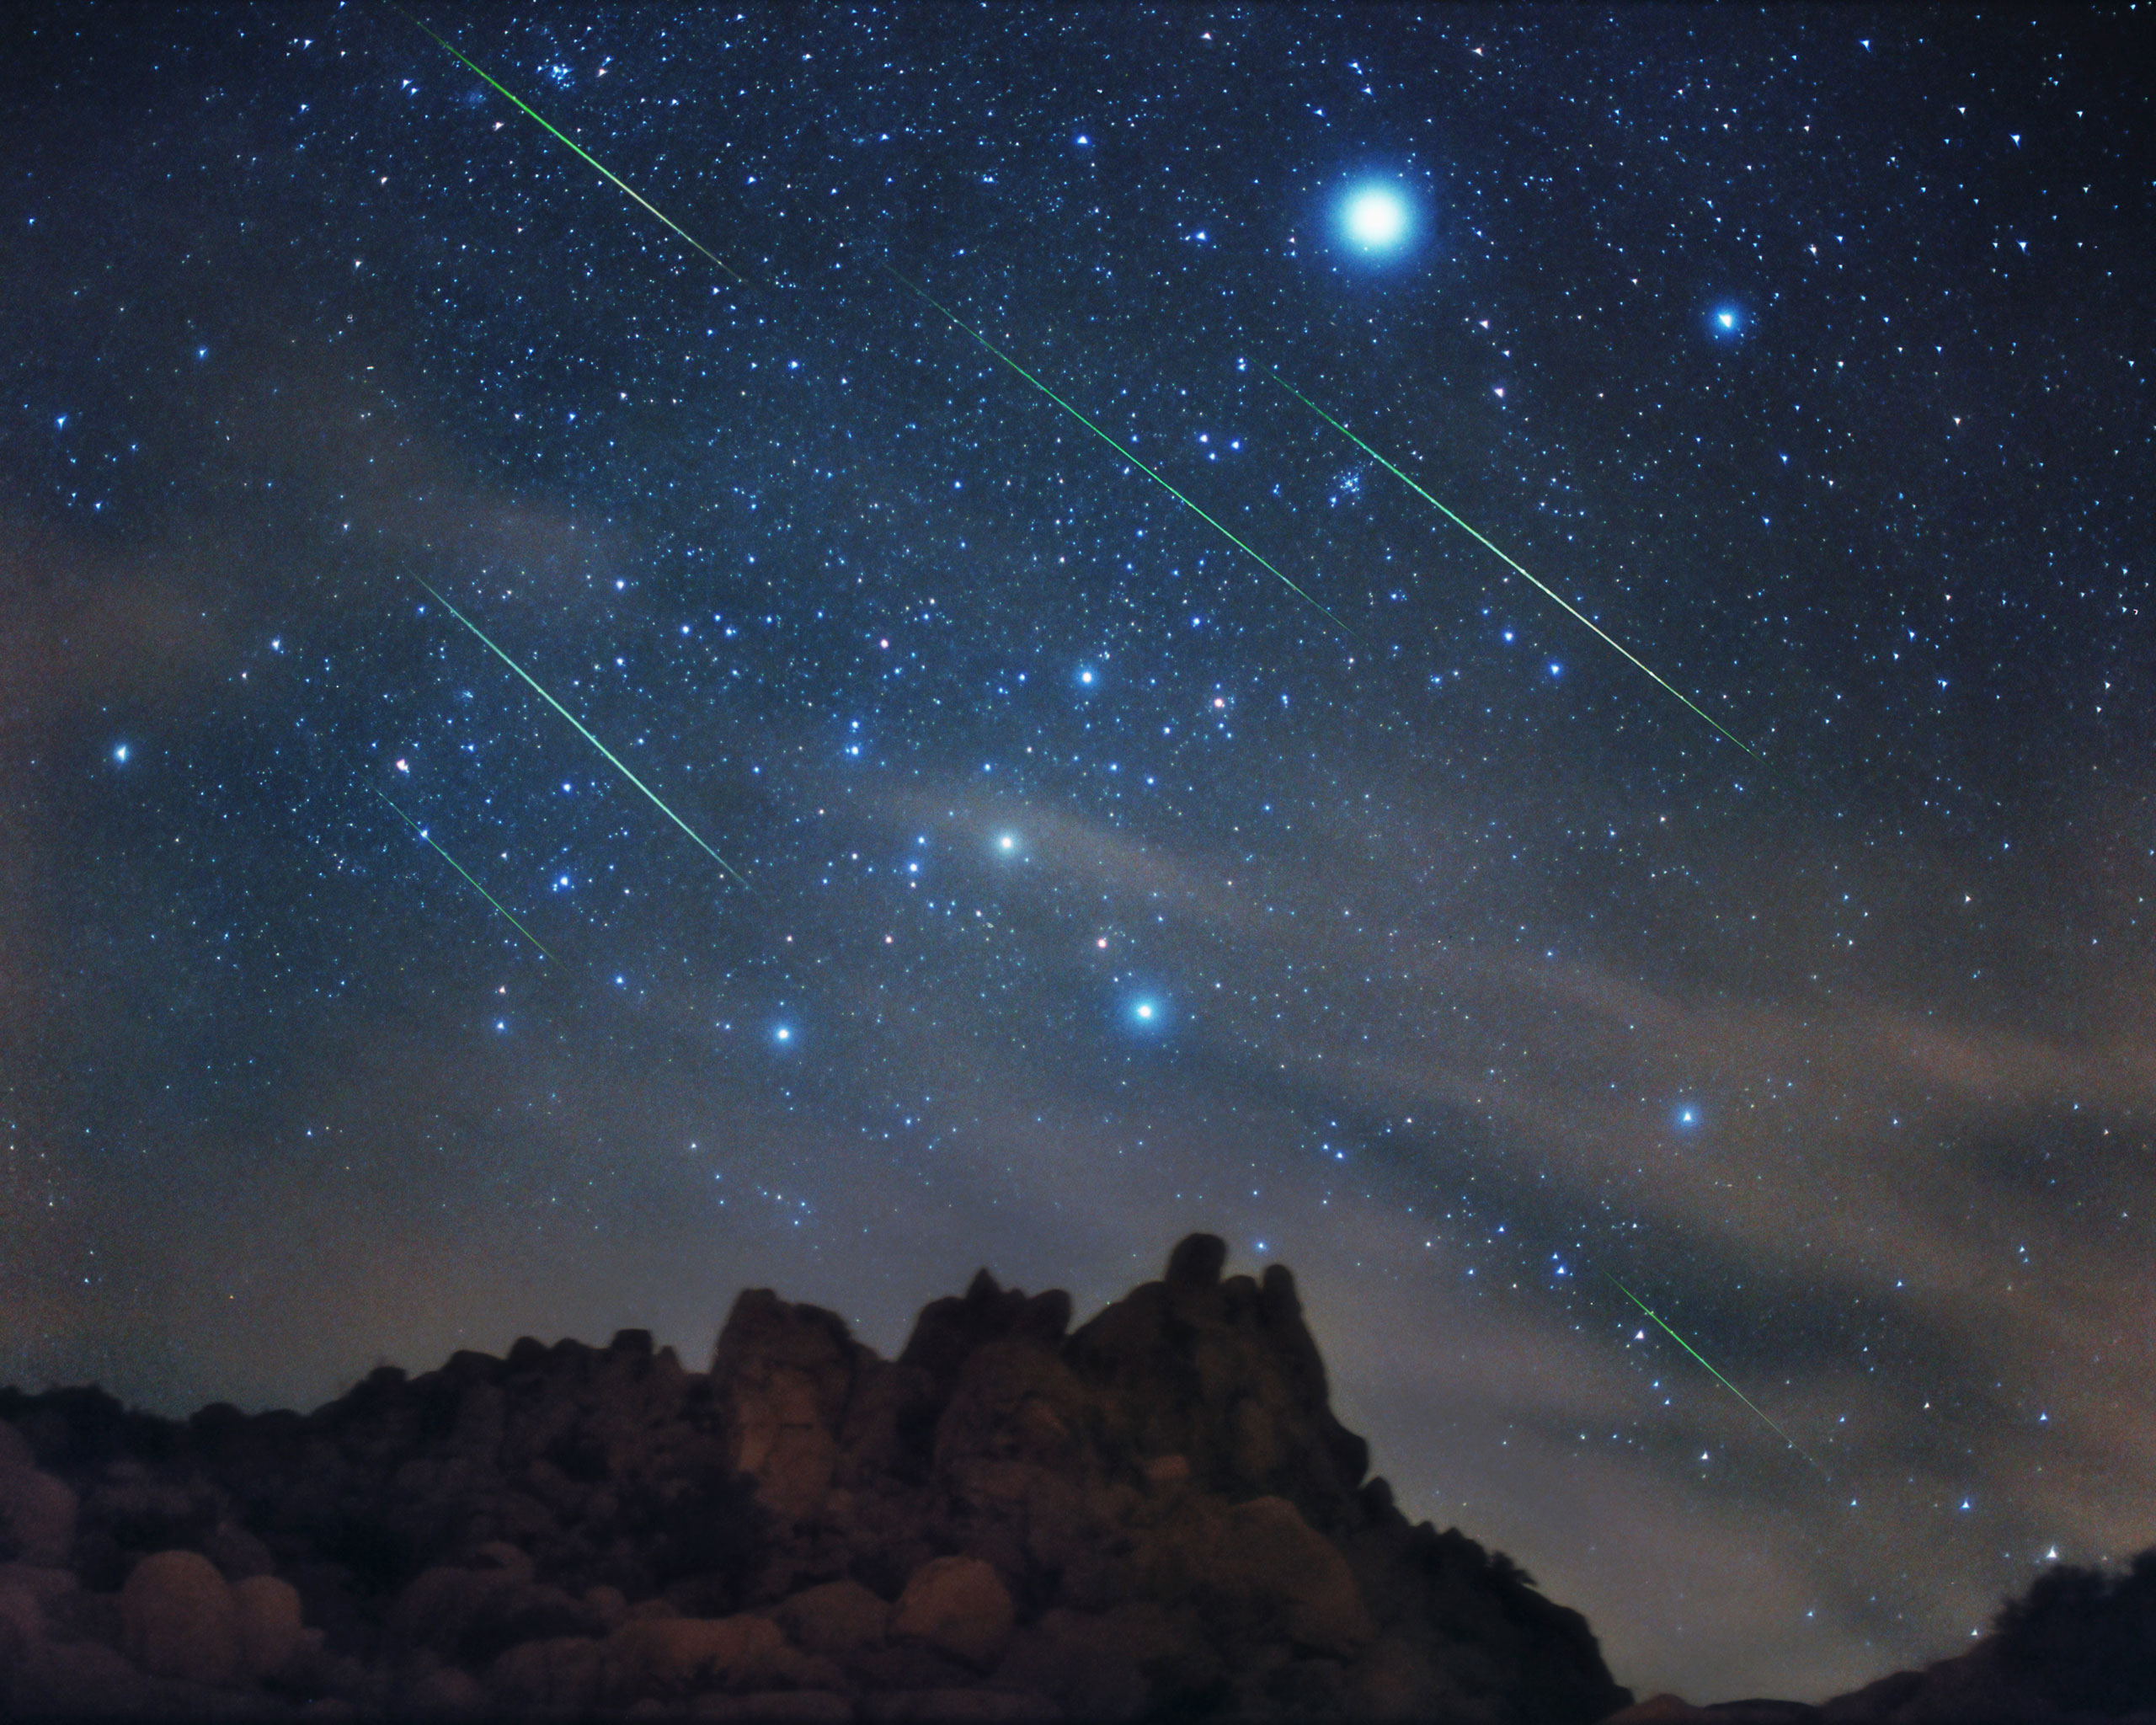 A multiple exposure of a Leonid meteor shower over Joshua Tree National Park.